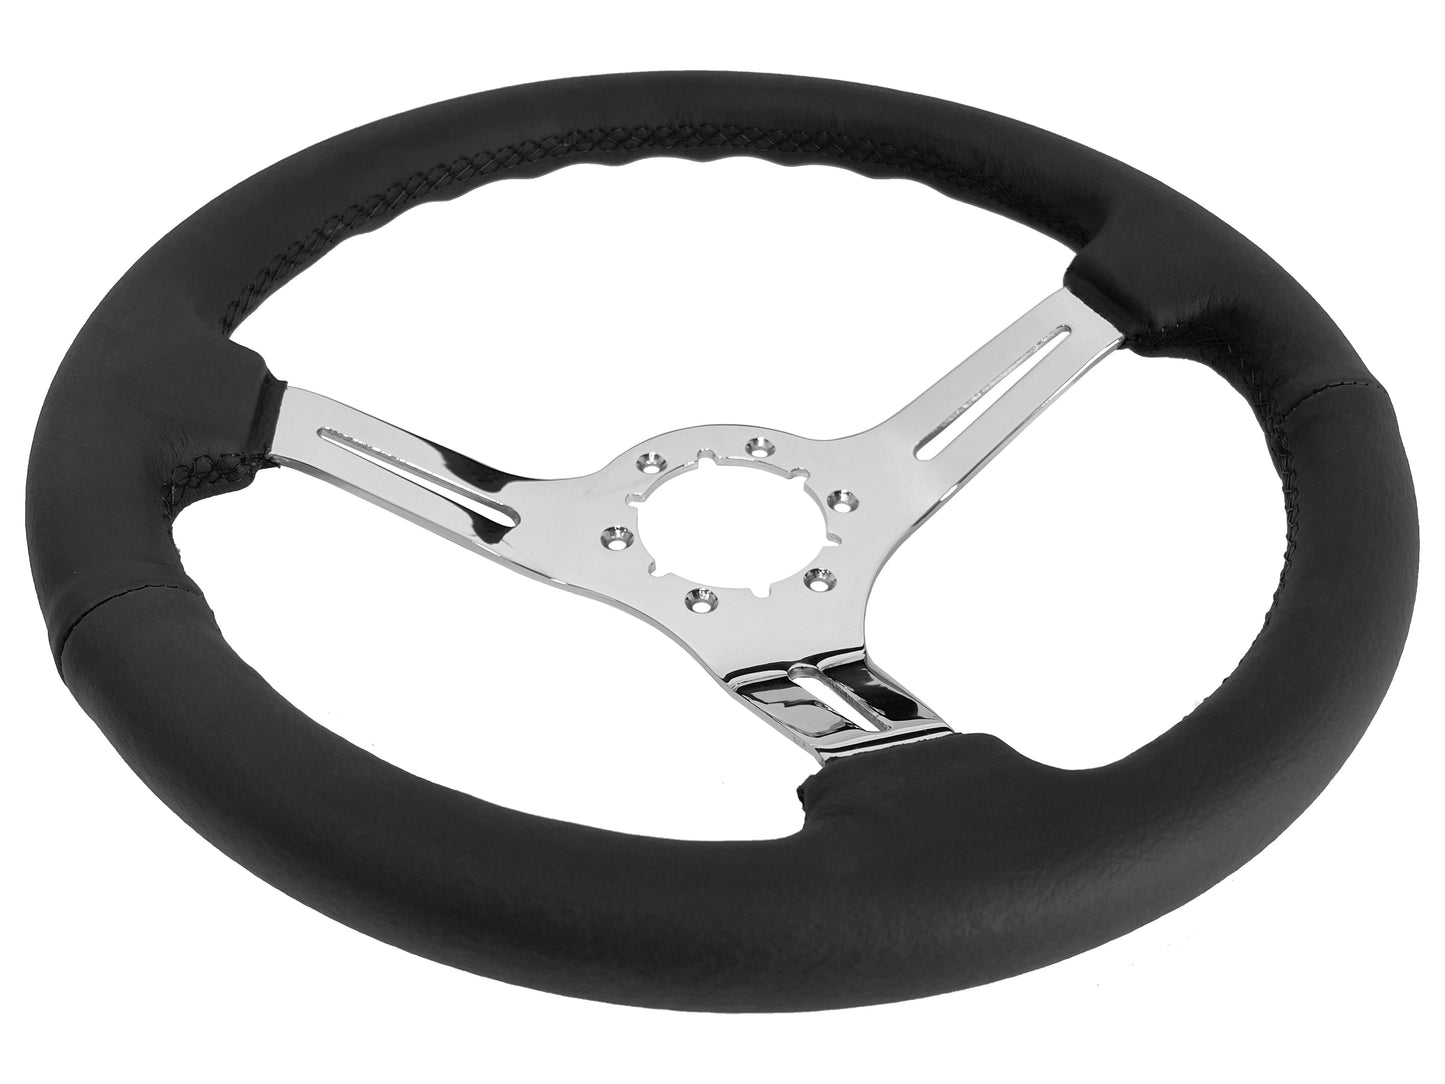 1970 Ford Falcon Steering Wheel Kit | Black Leather | ST3012BLK